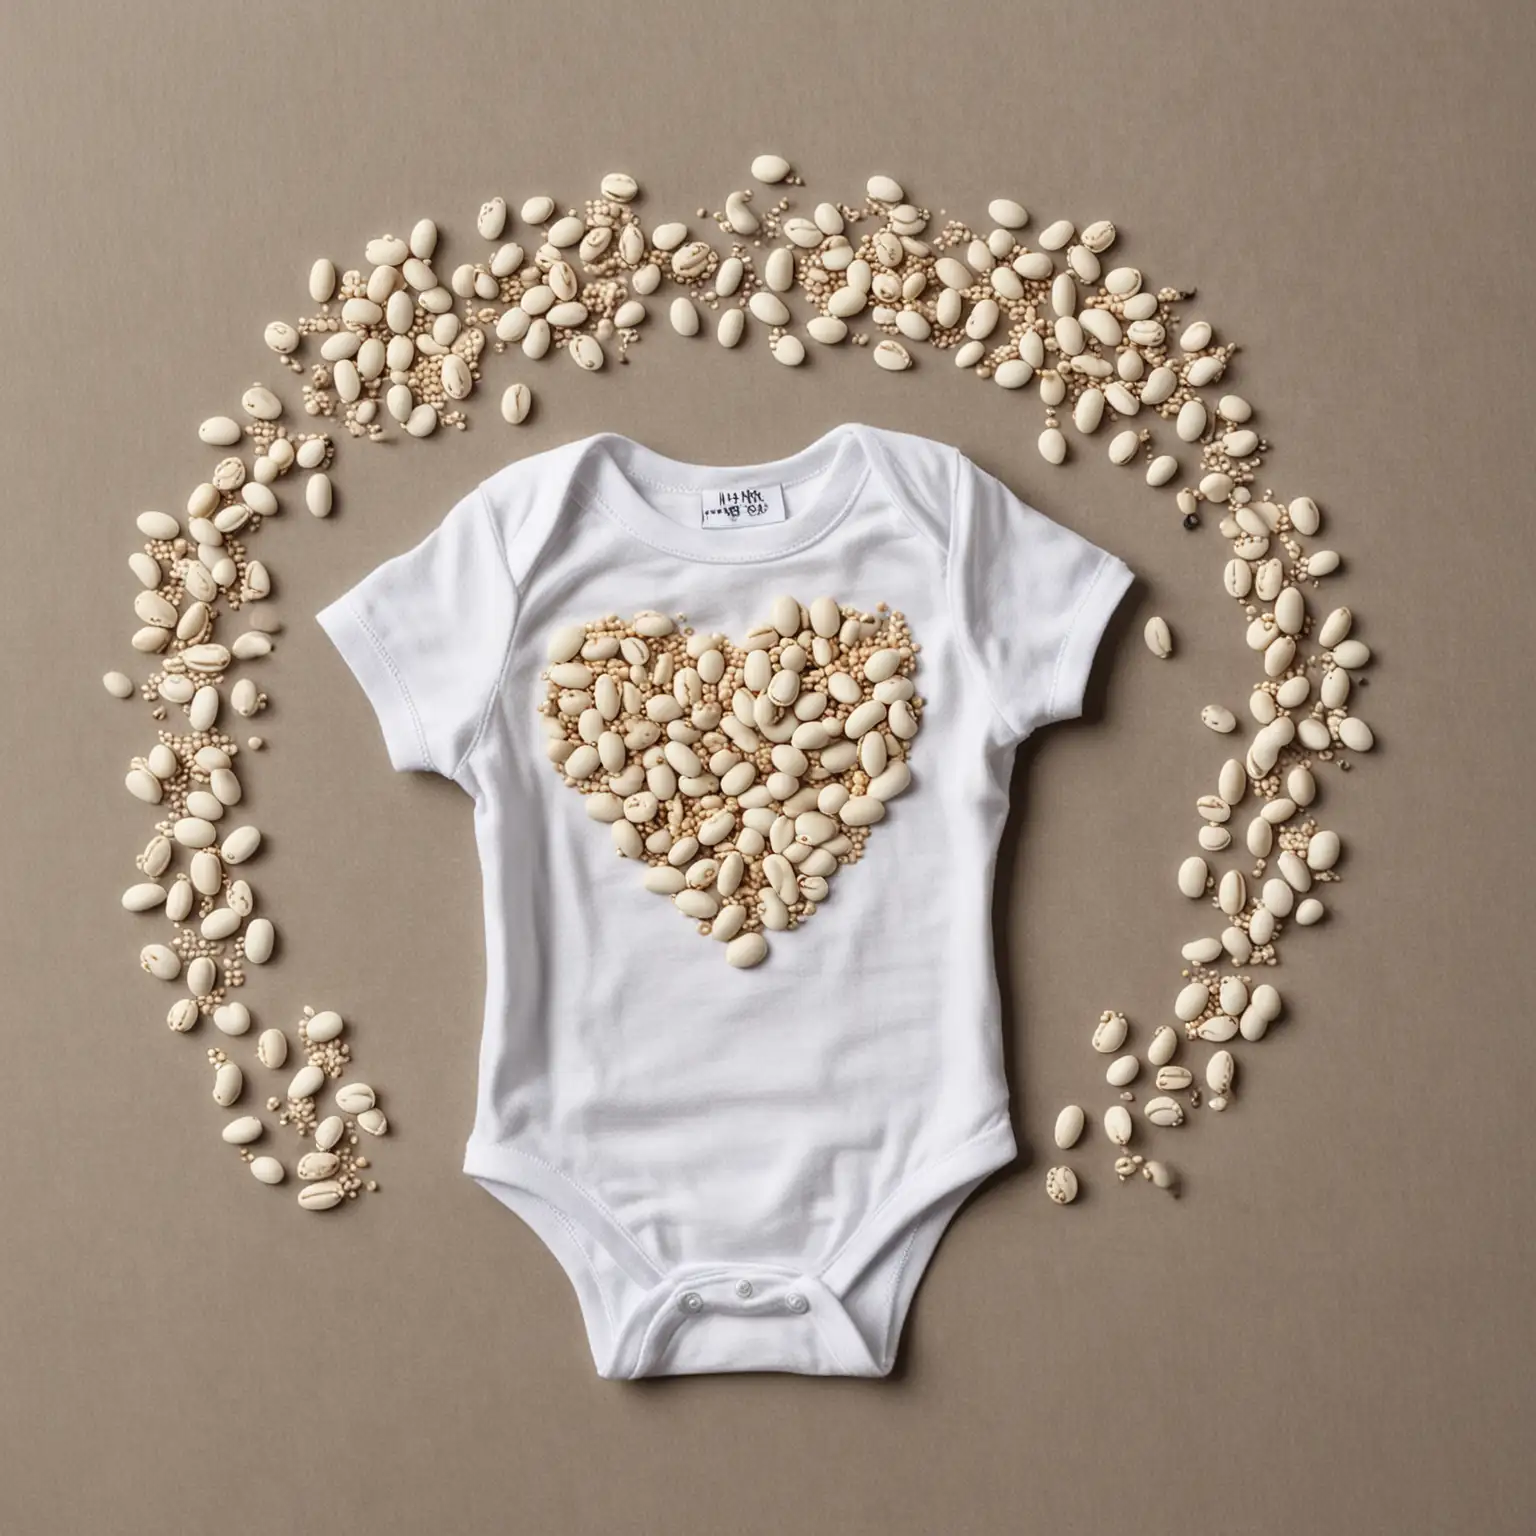 flat lay image, white Baby onesie, spilt beans, beans in the shape of a heart